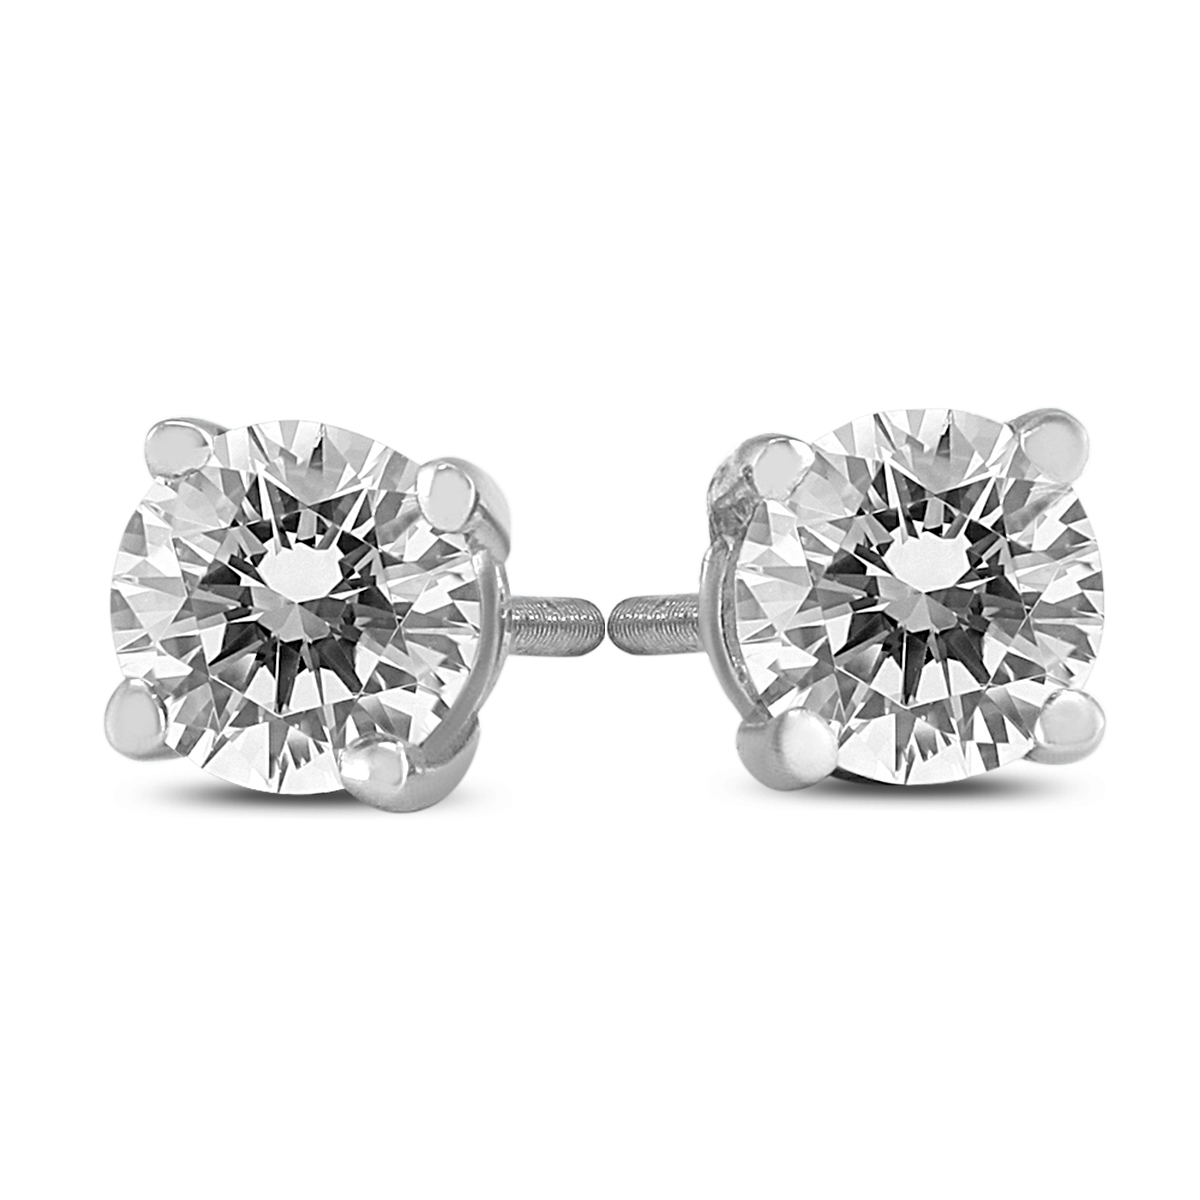 1/2 Carat TW AGS Certified Round Diamond Solitaire Stud Earrings in 14K White Gold (I-J Color, SI1-SI2 Clarity)